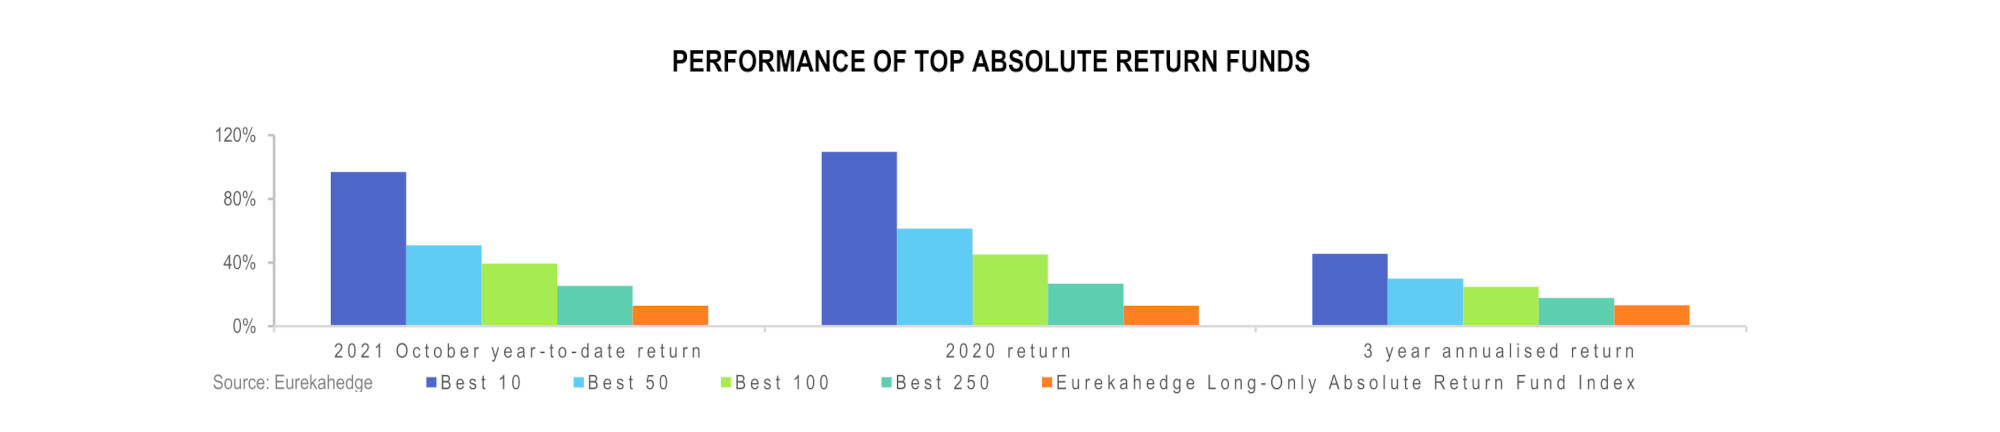 Long-only absolute return Funds Infographic Dec 2021 - Fund Performance